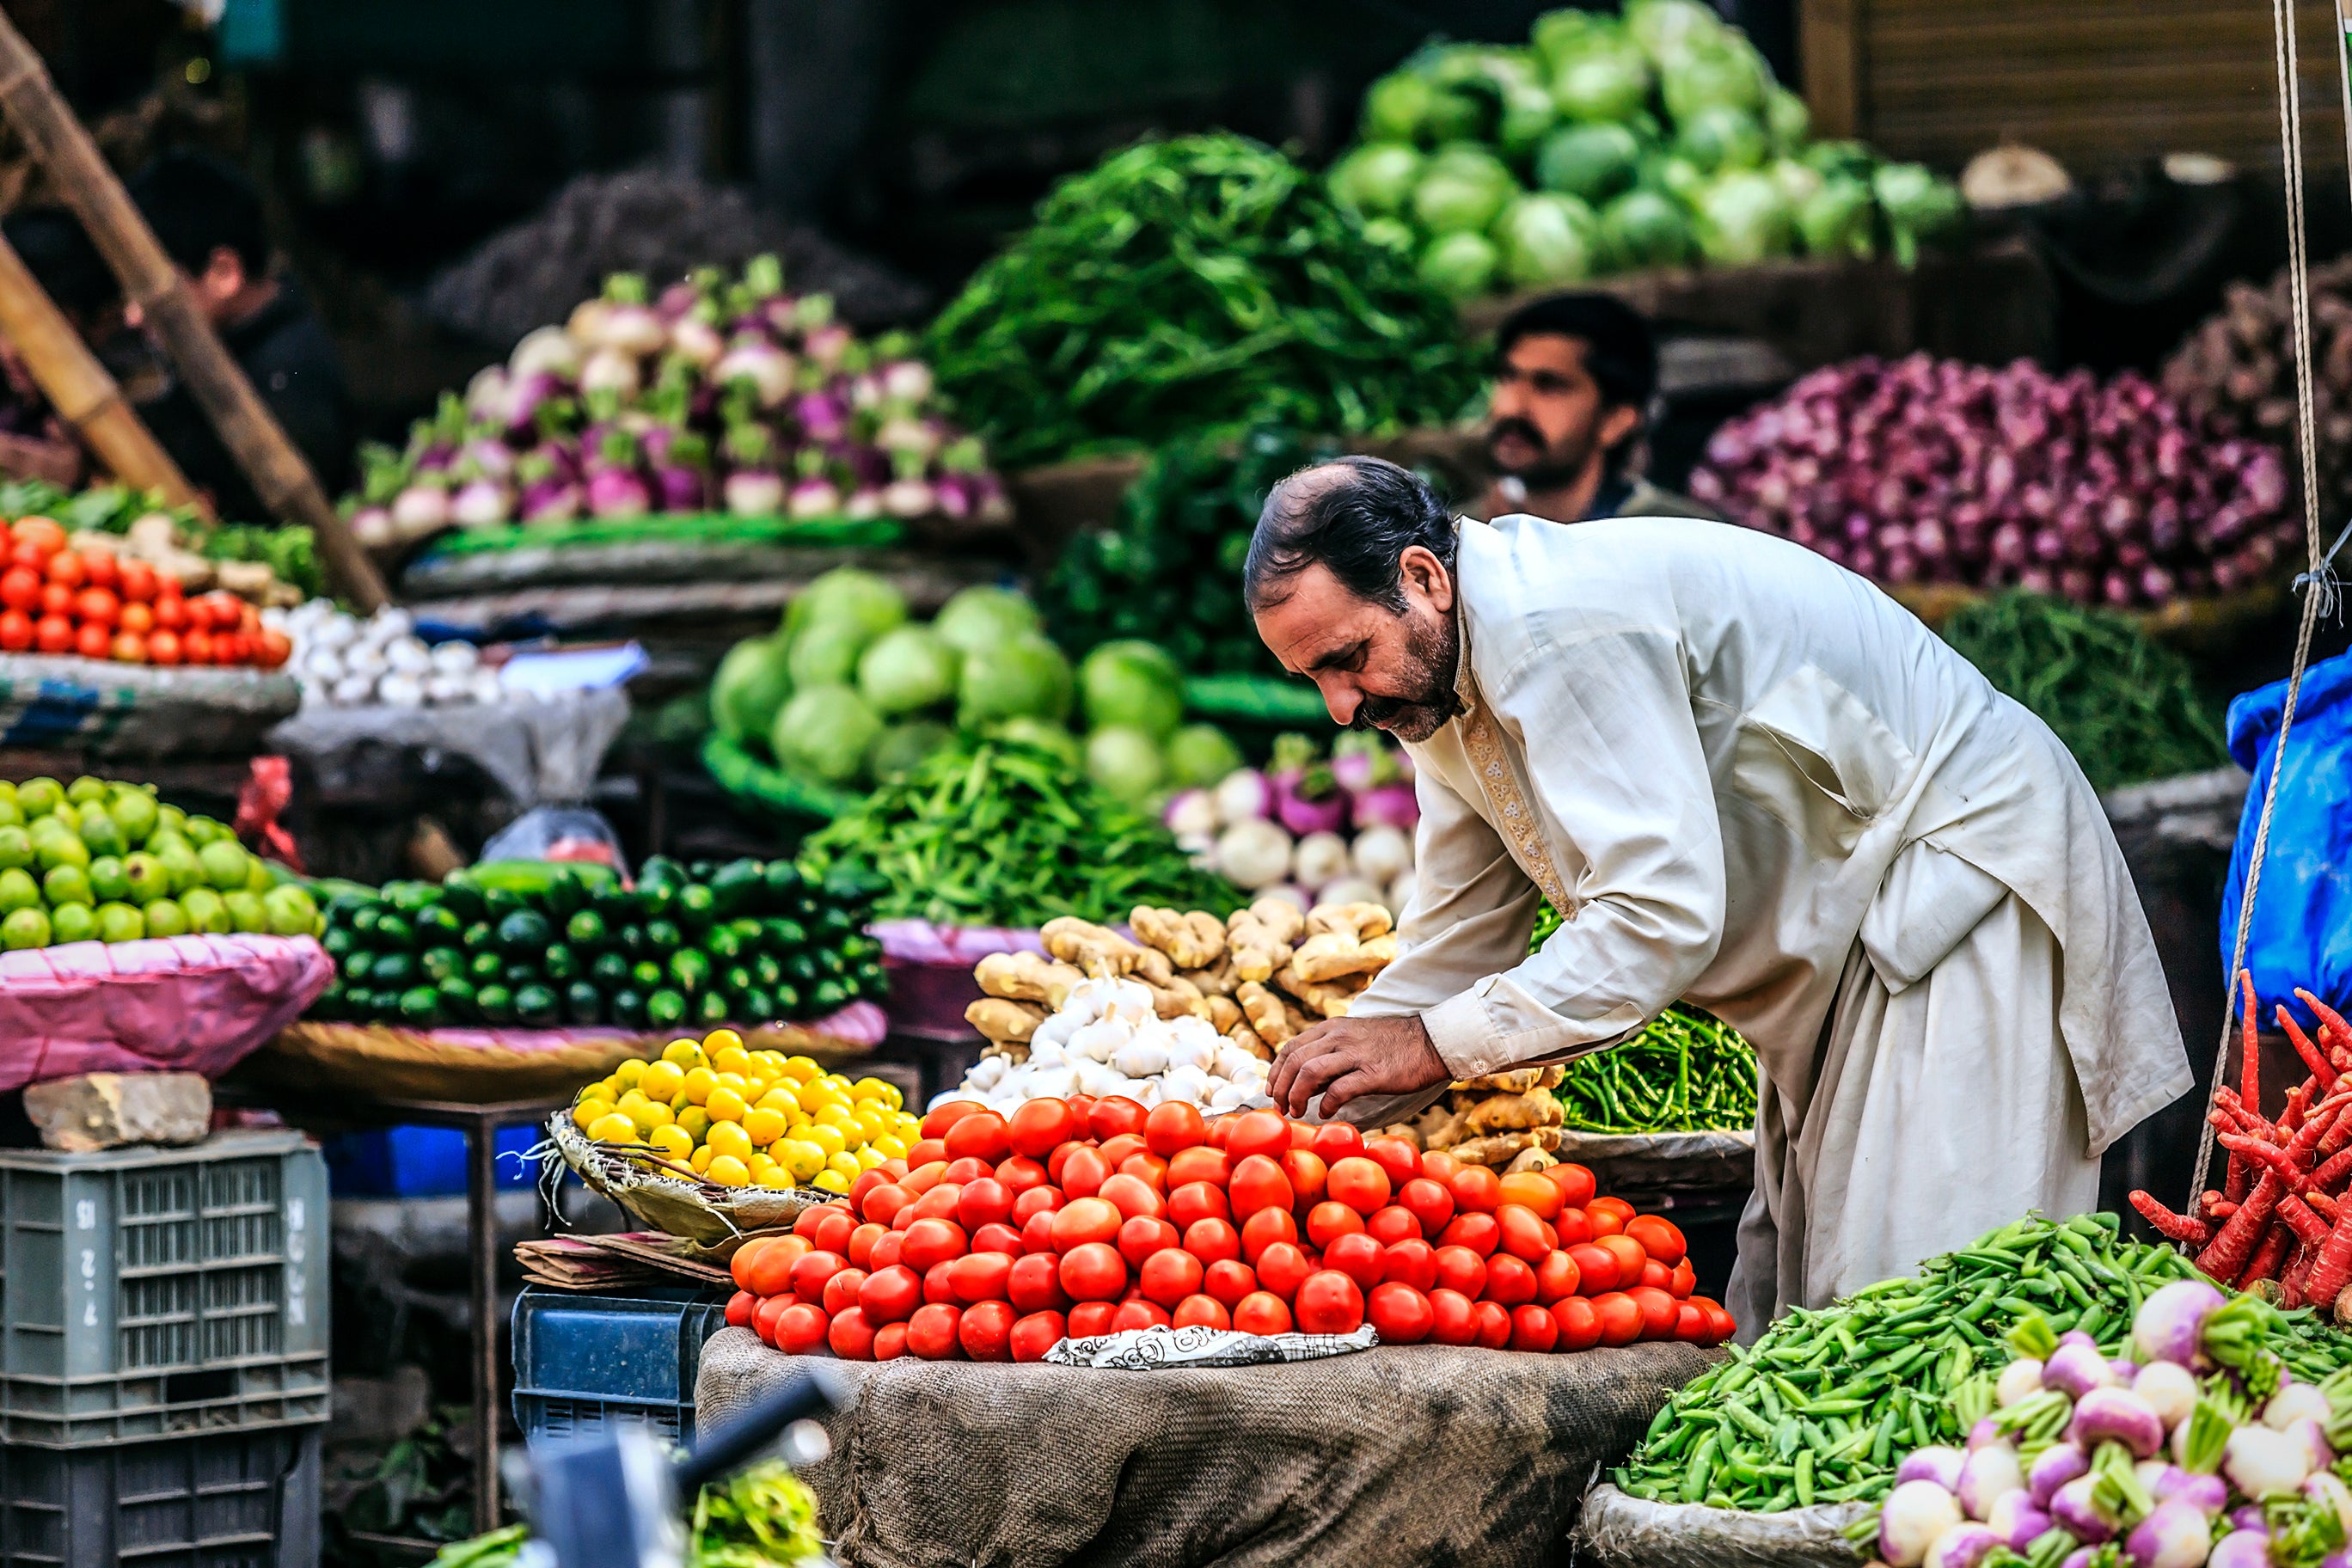 A man at the vegetable market. Photo by Faryab Shakh